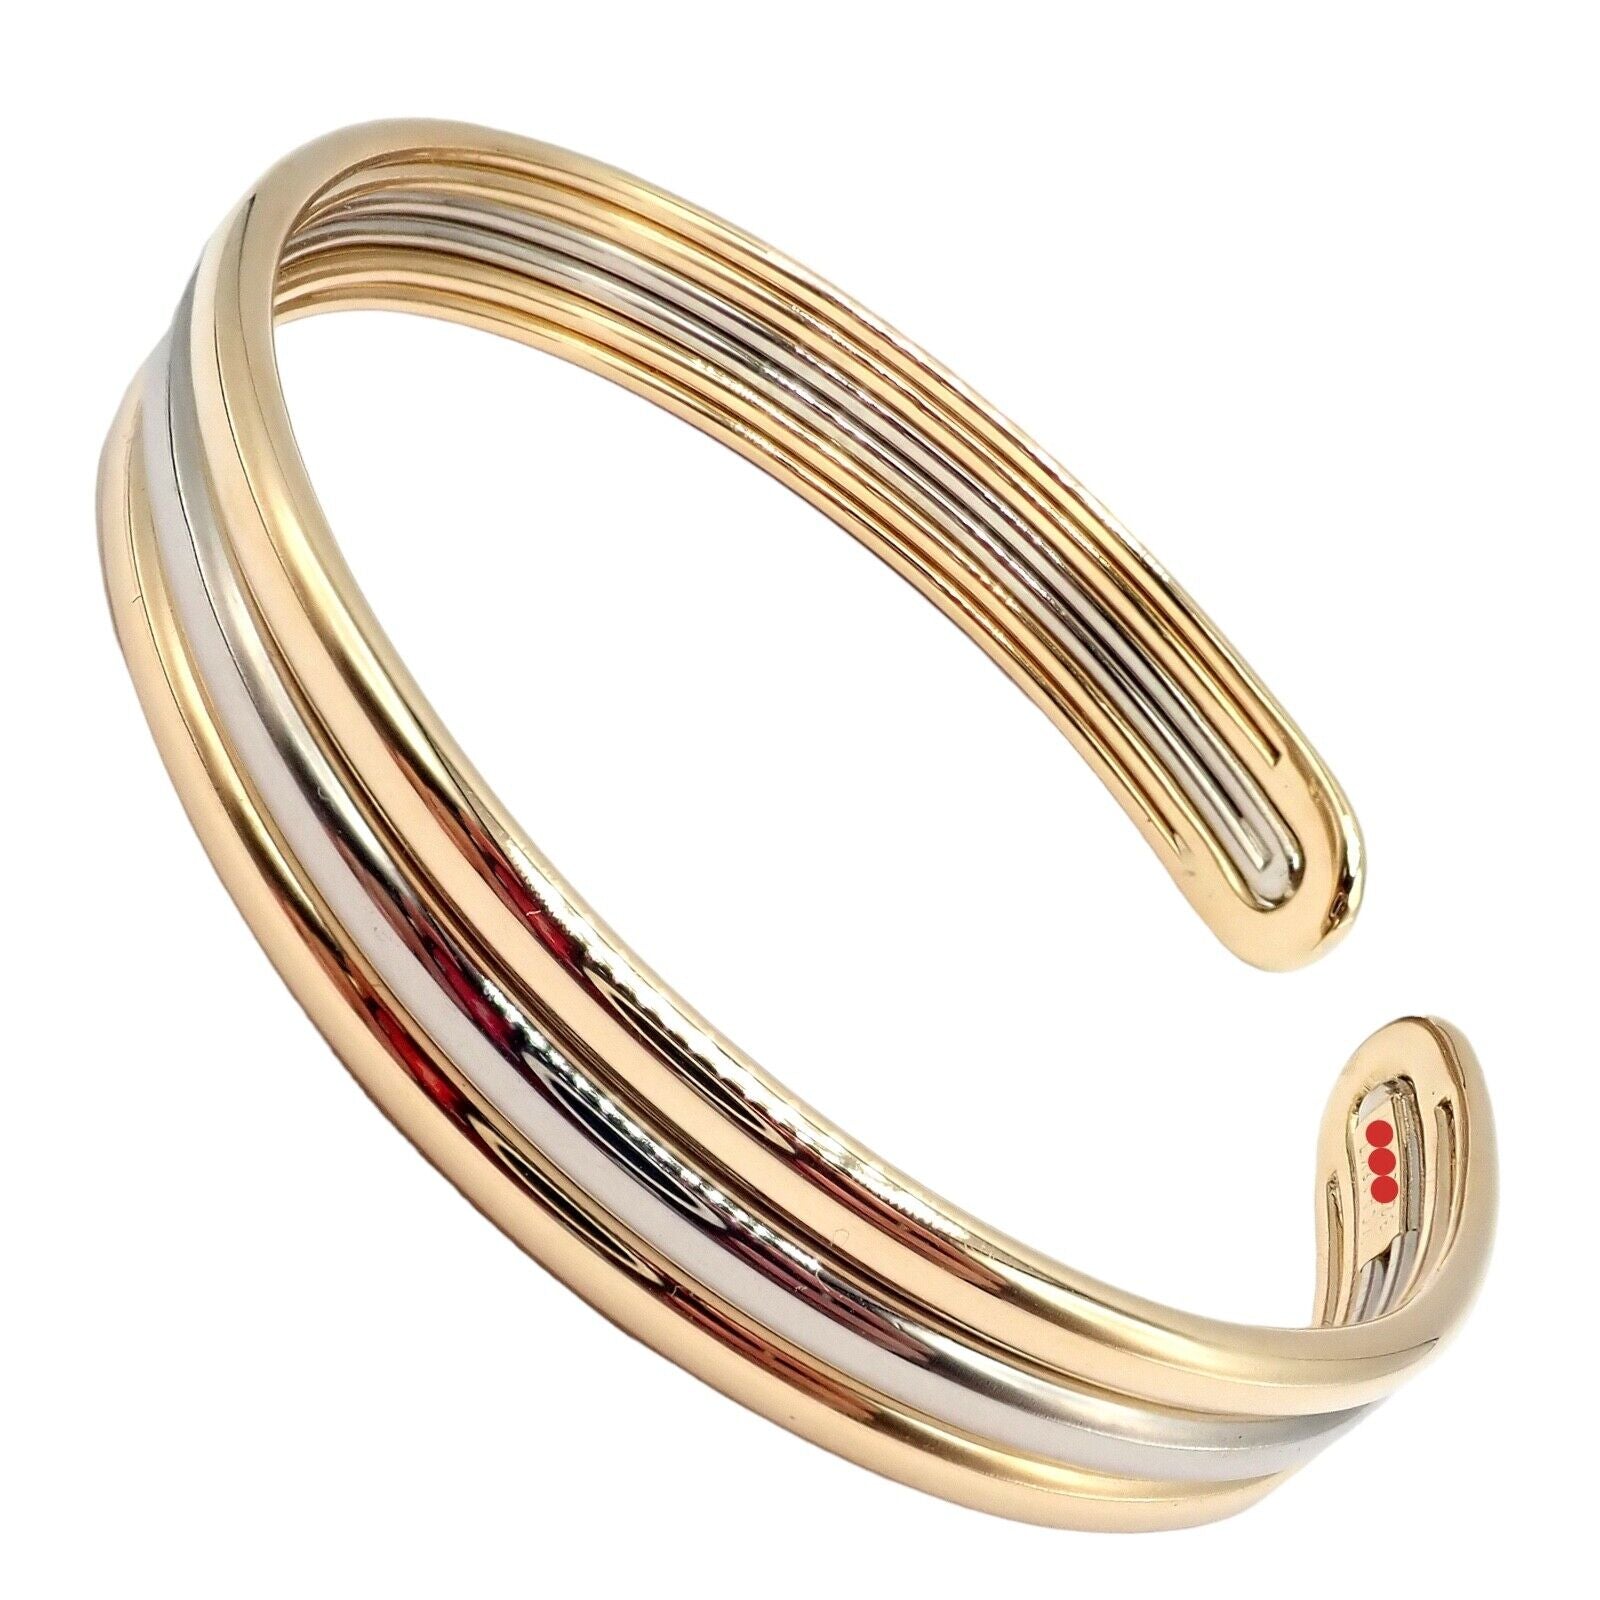 Van Cleef & Arpels Jewelry & Watches:Fine Jewelry:Bracelets & Charms Authentic! Van Cleef & Arpels 18k Yellow & White Gold Bangle Cuff Bracelet